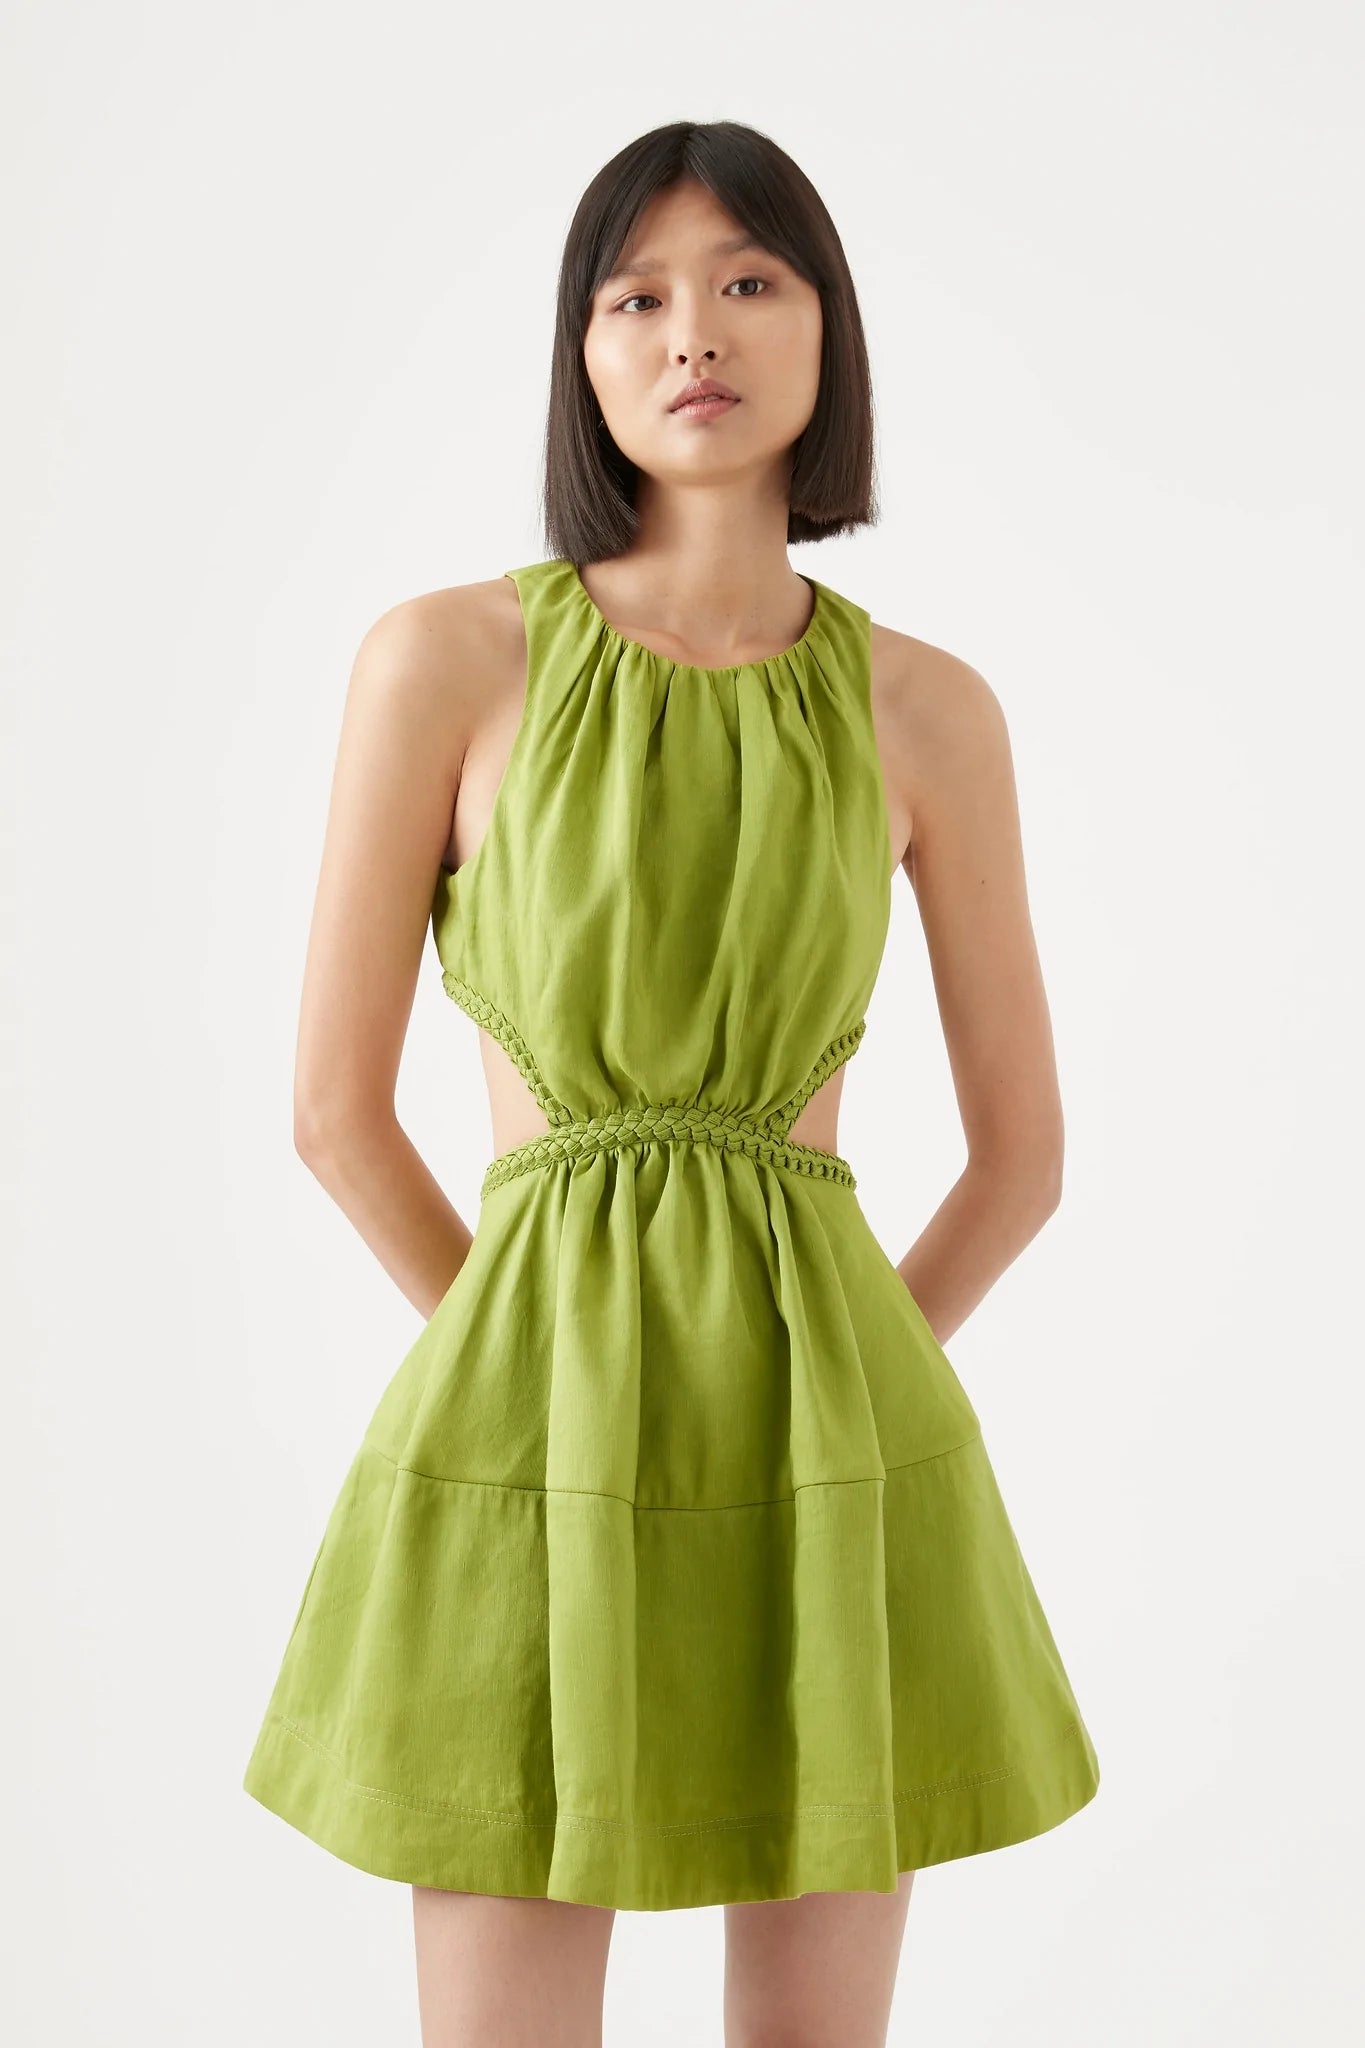 Voyage braided cut out mini dress in verdant green